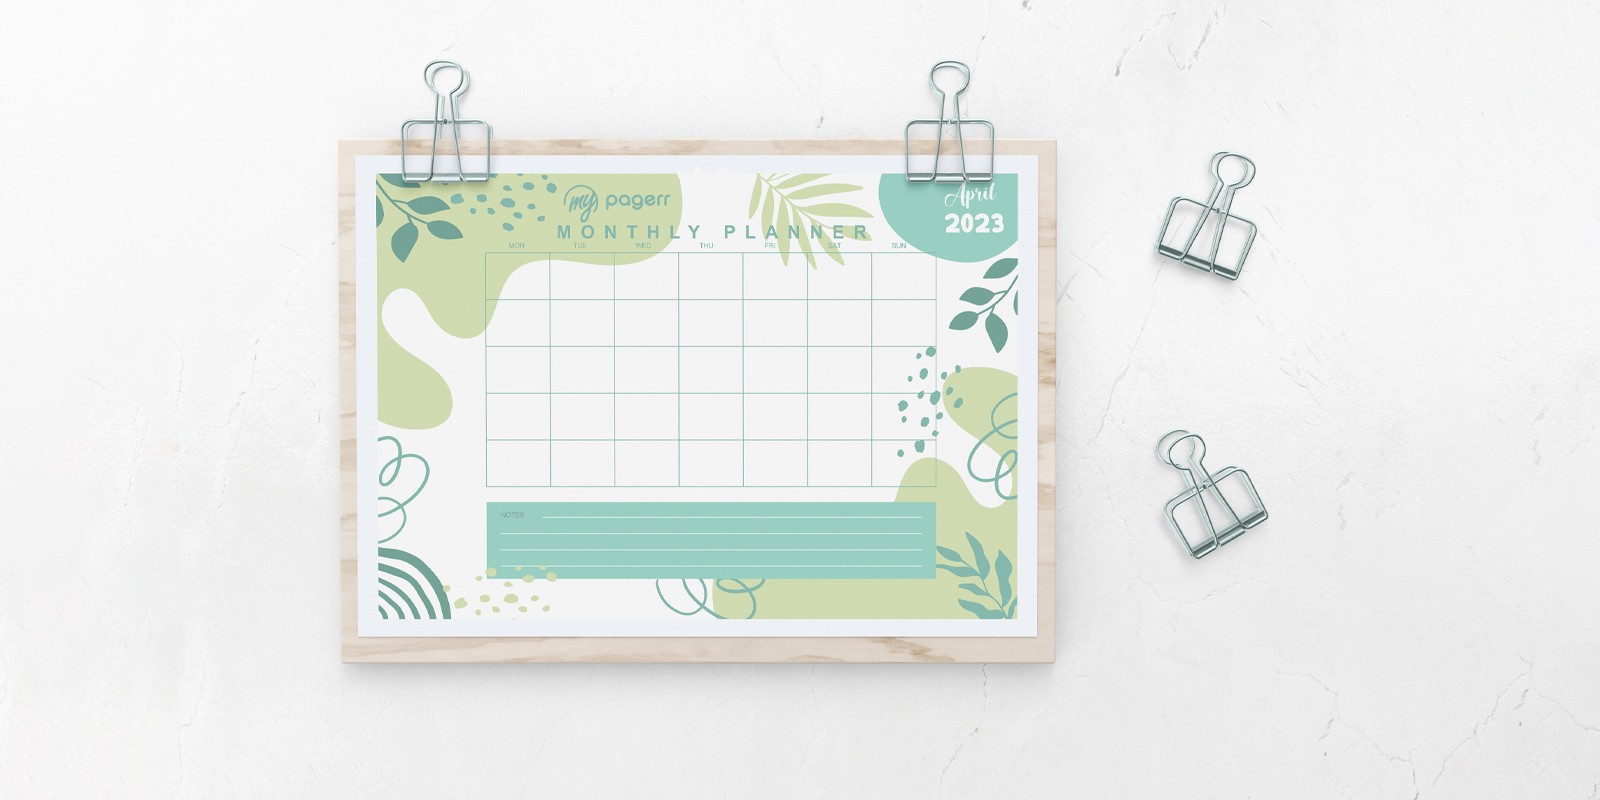 Calendar planners in Wollongong - Print with Pagerr